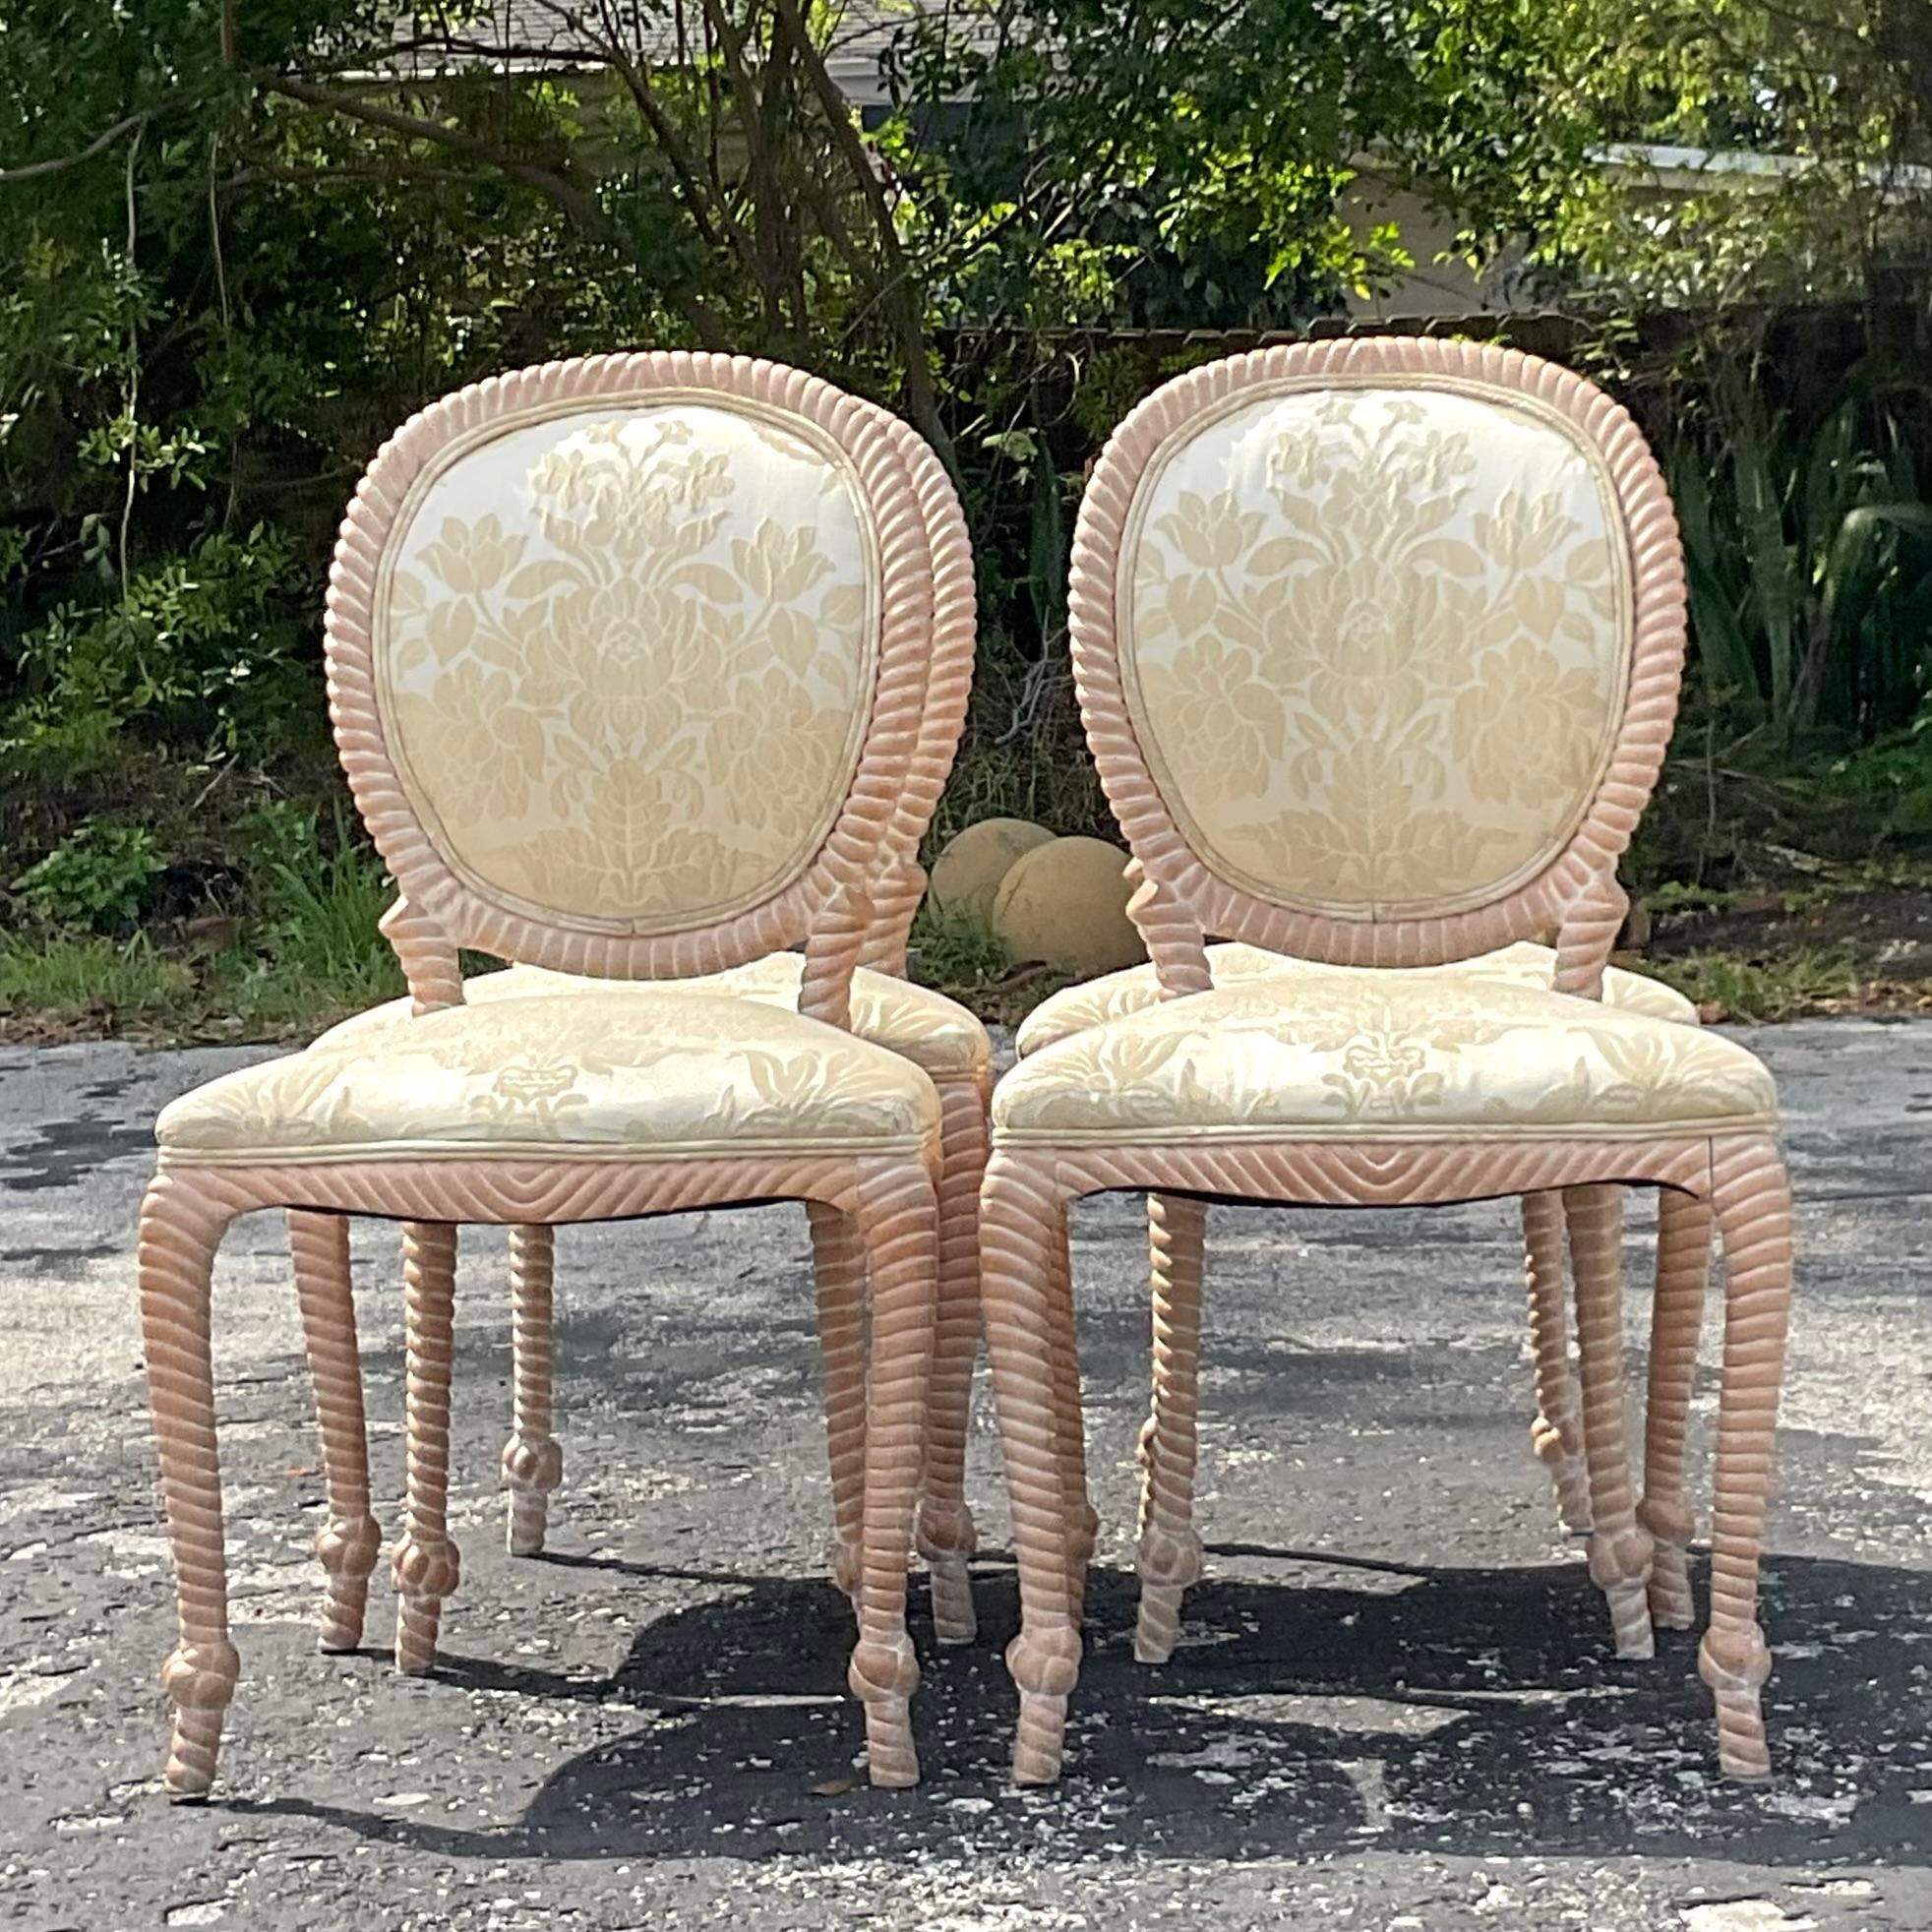 20th Century Vintage Coastal Carved Rope Dining Chairs - Set of 4 For Sale